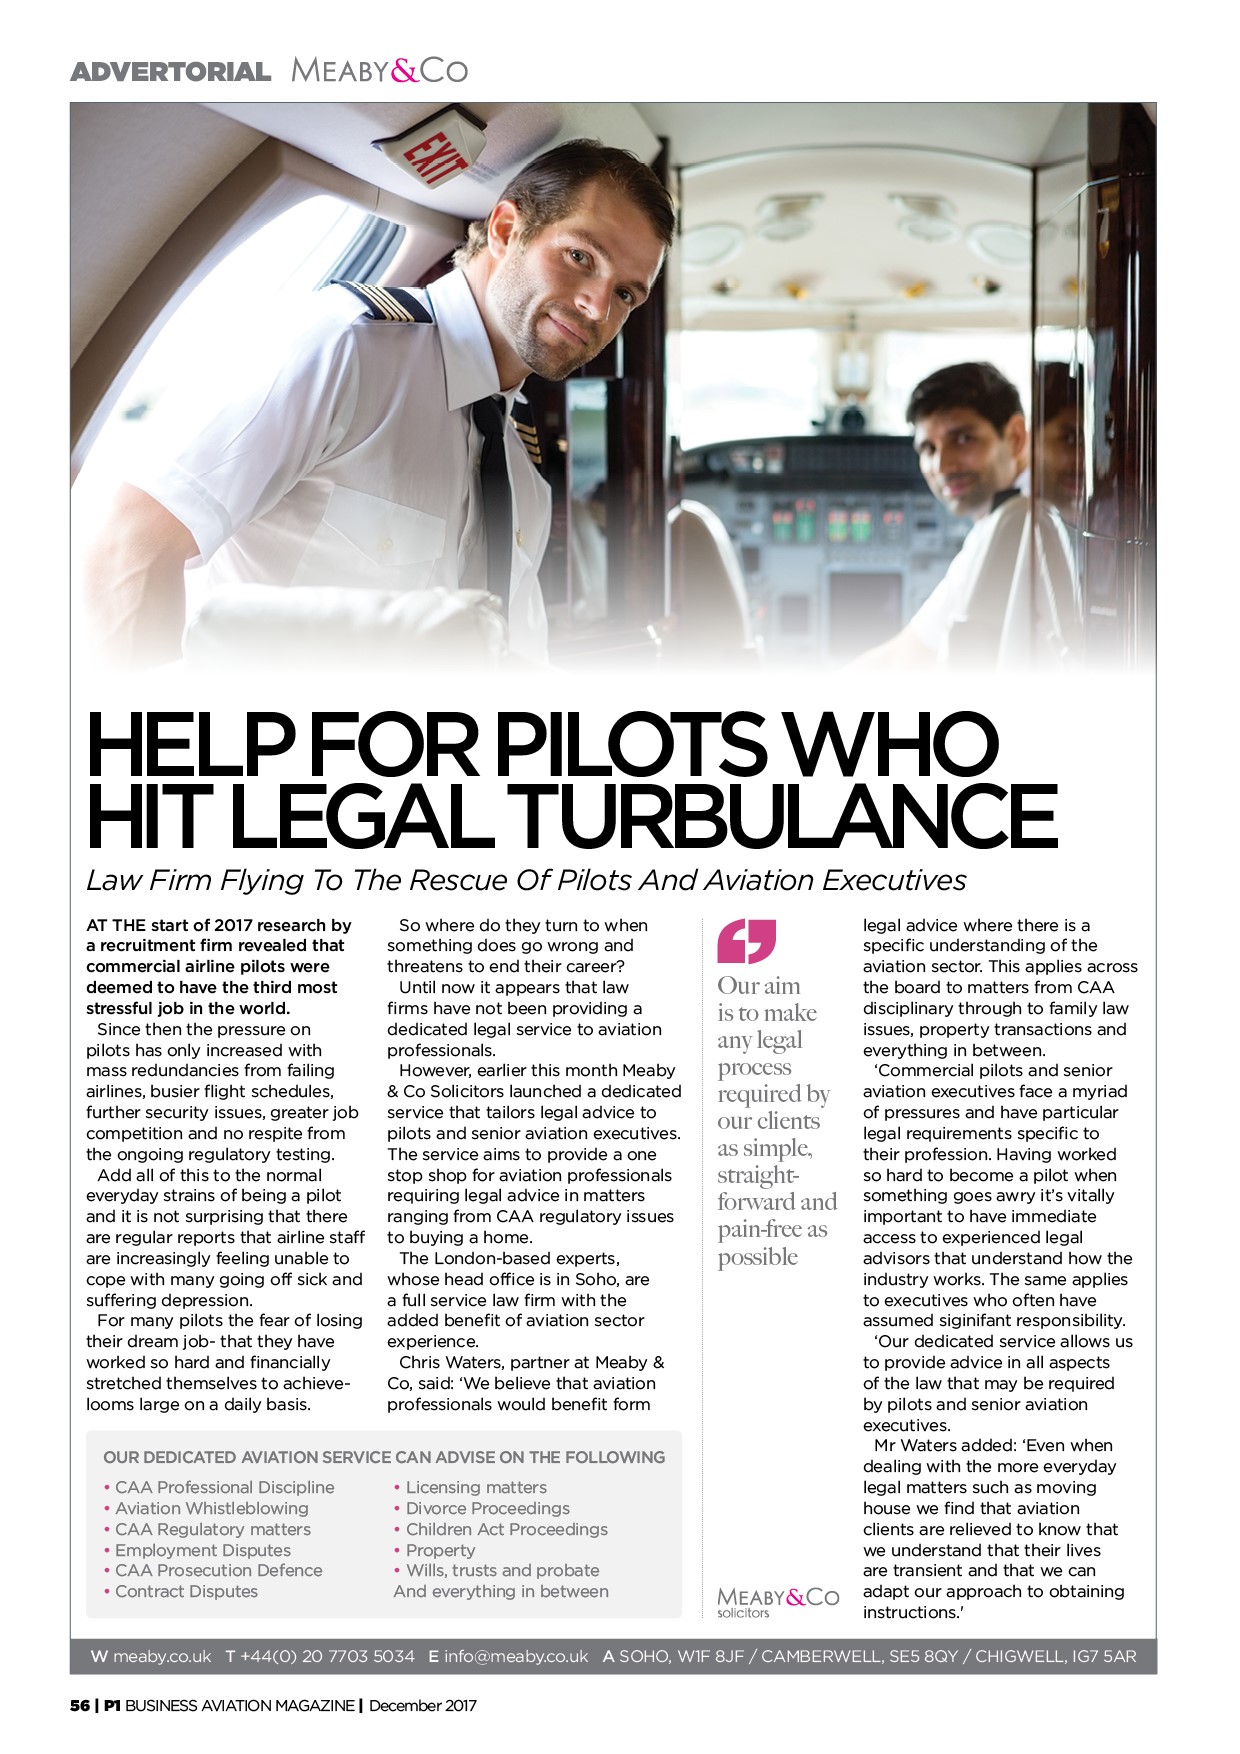 Law Firm Flies To Rescue Of Pilots